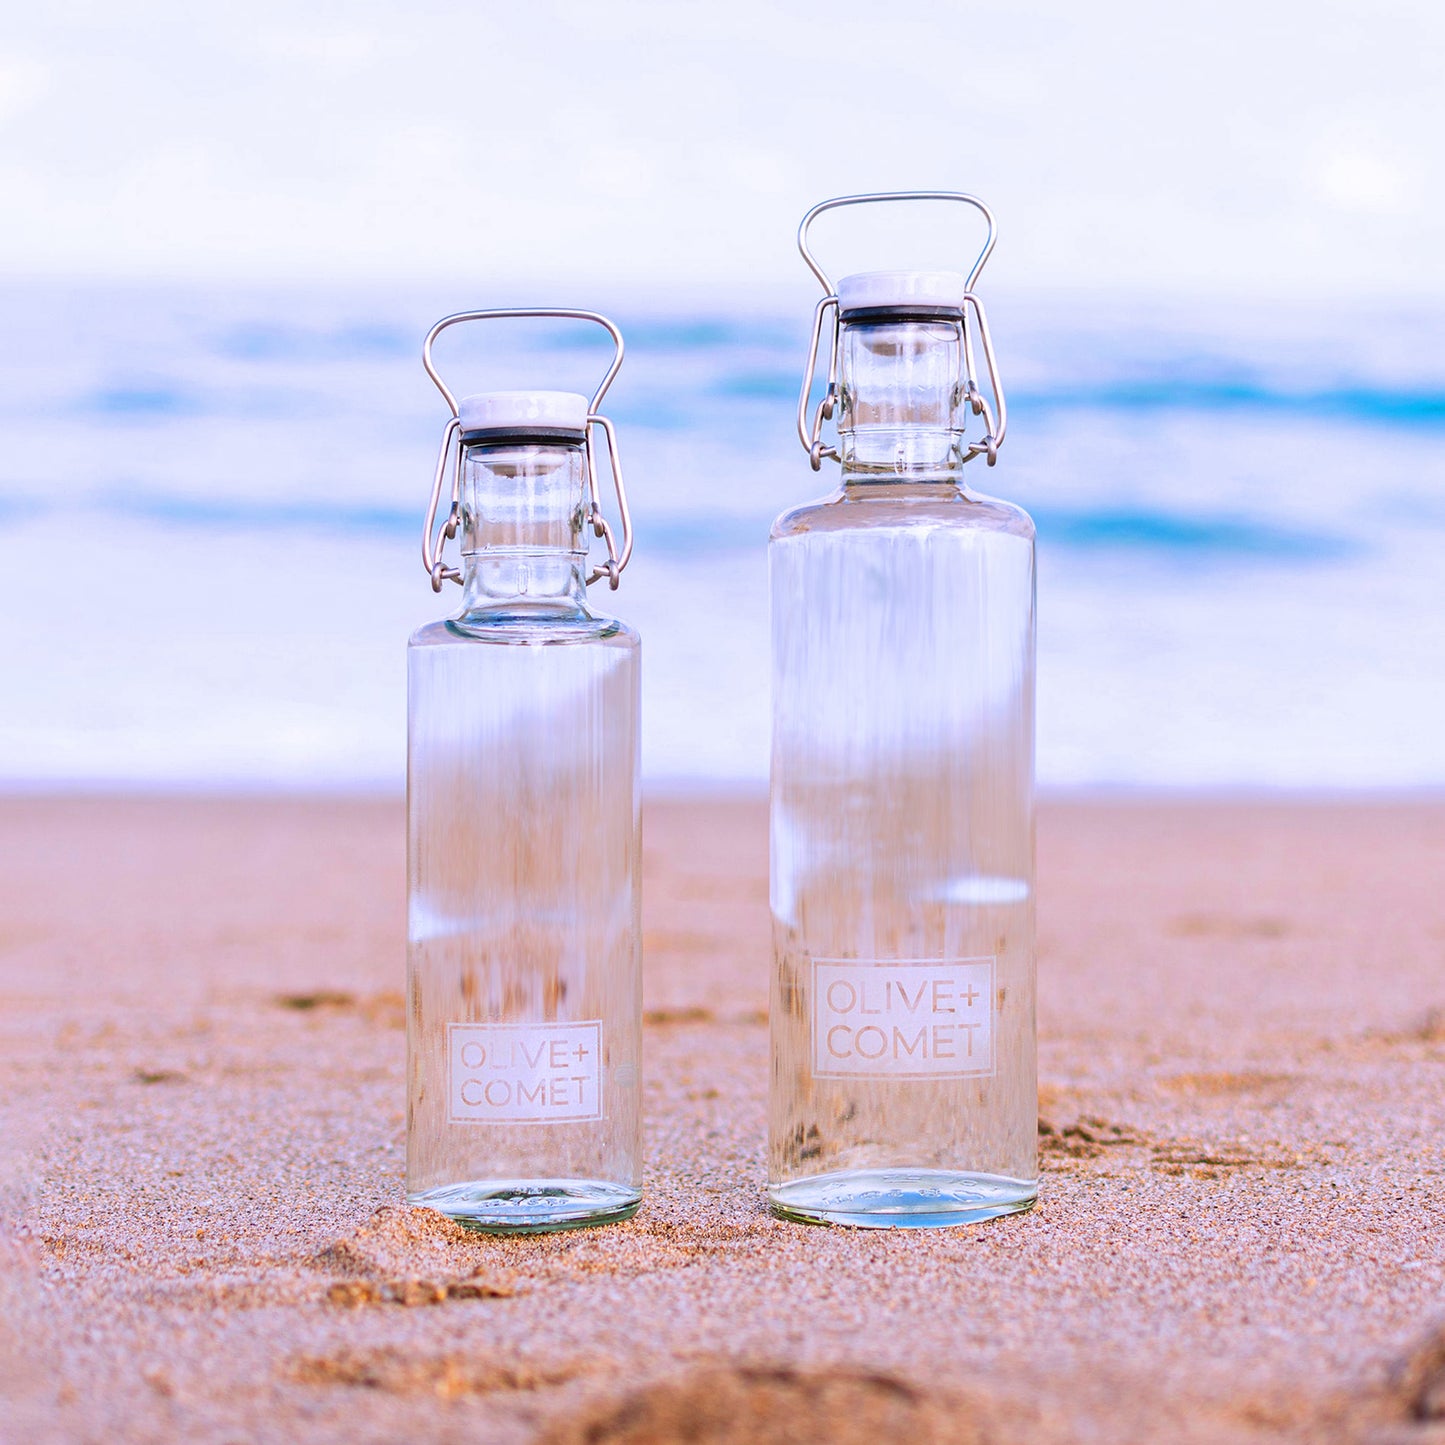 Two Hadley bottles stand side-by-side at the ocean's edge. On the left is the .6 liter variant—and on the right, the 1.0 liter version for comparison. The bottles are identical looking, except for the capacity.